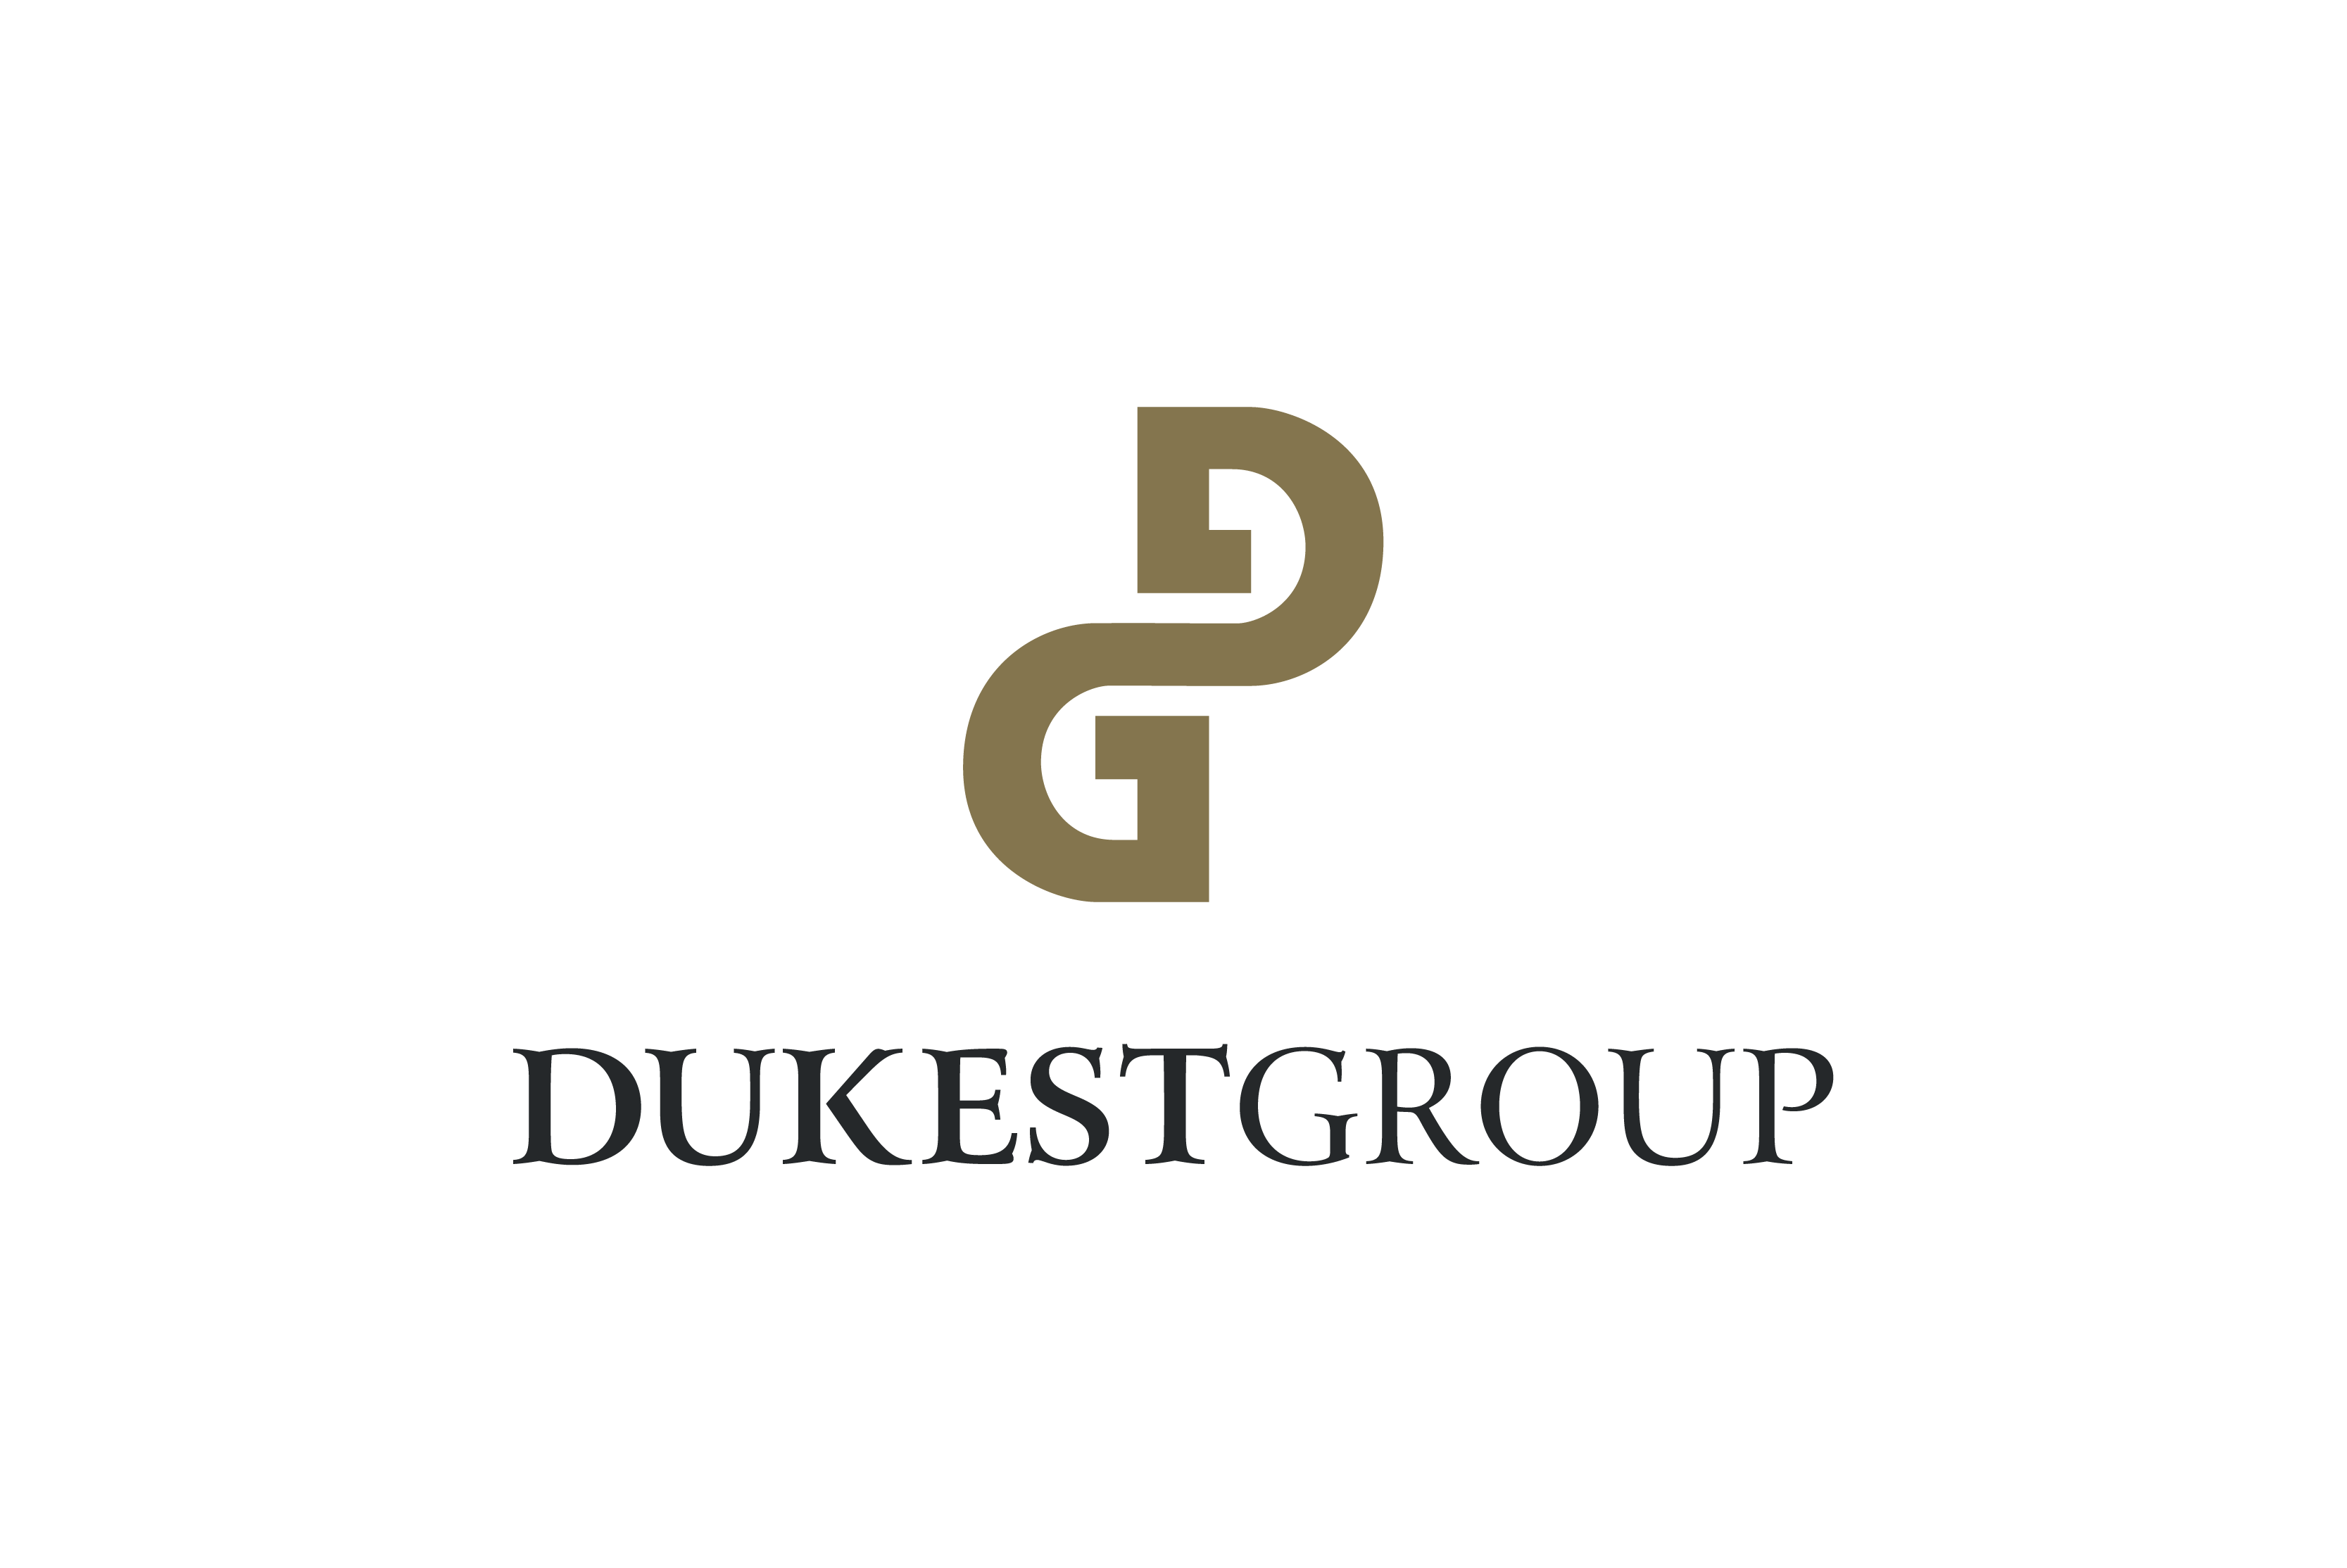 Dukest Group – Hospitality, Agri-business, Residential and Commercial Property